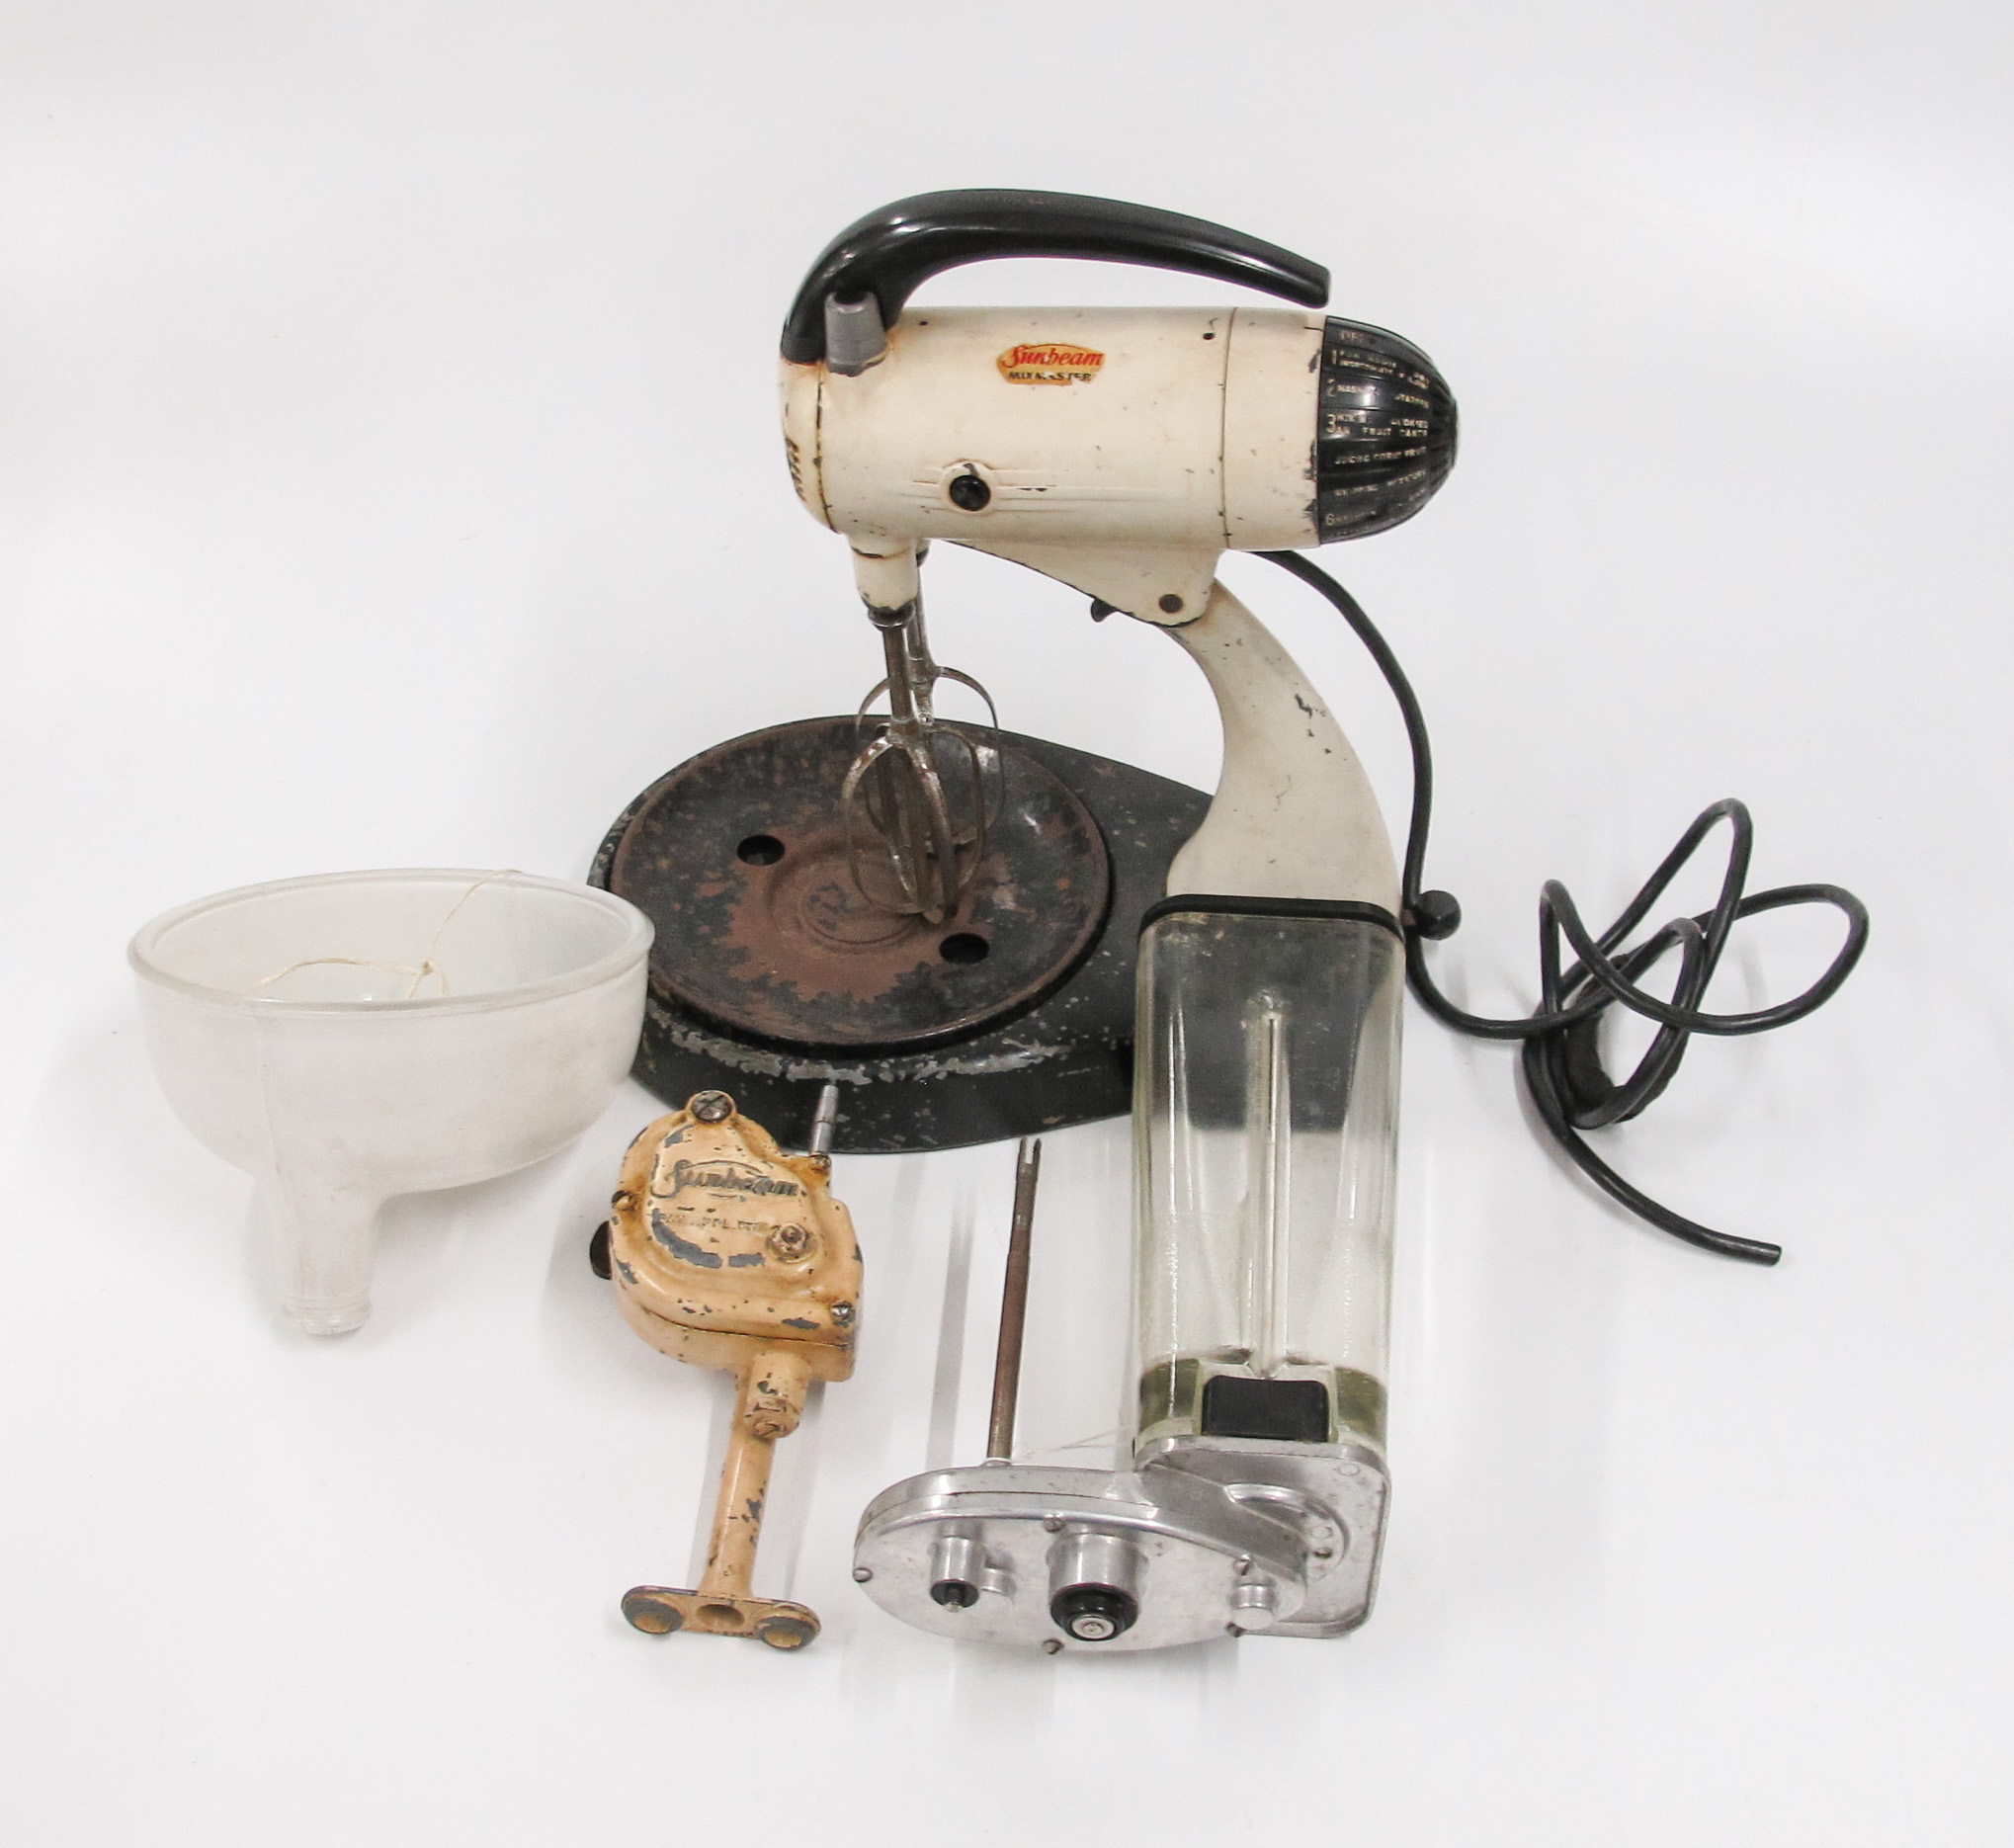 1950s Sunbeam Mixmaster Model 9B and attachments made by Cooper Engineering